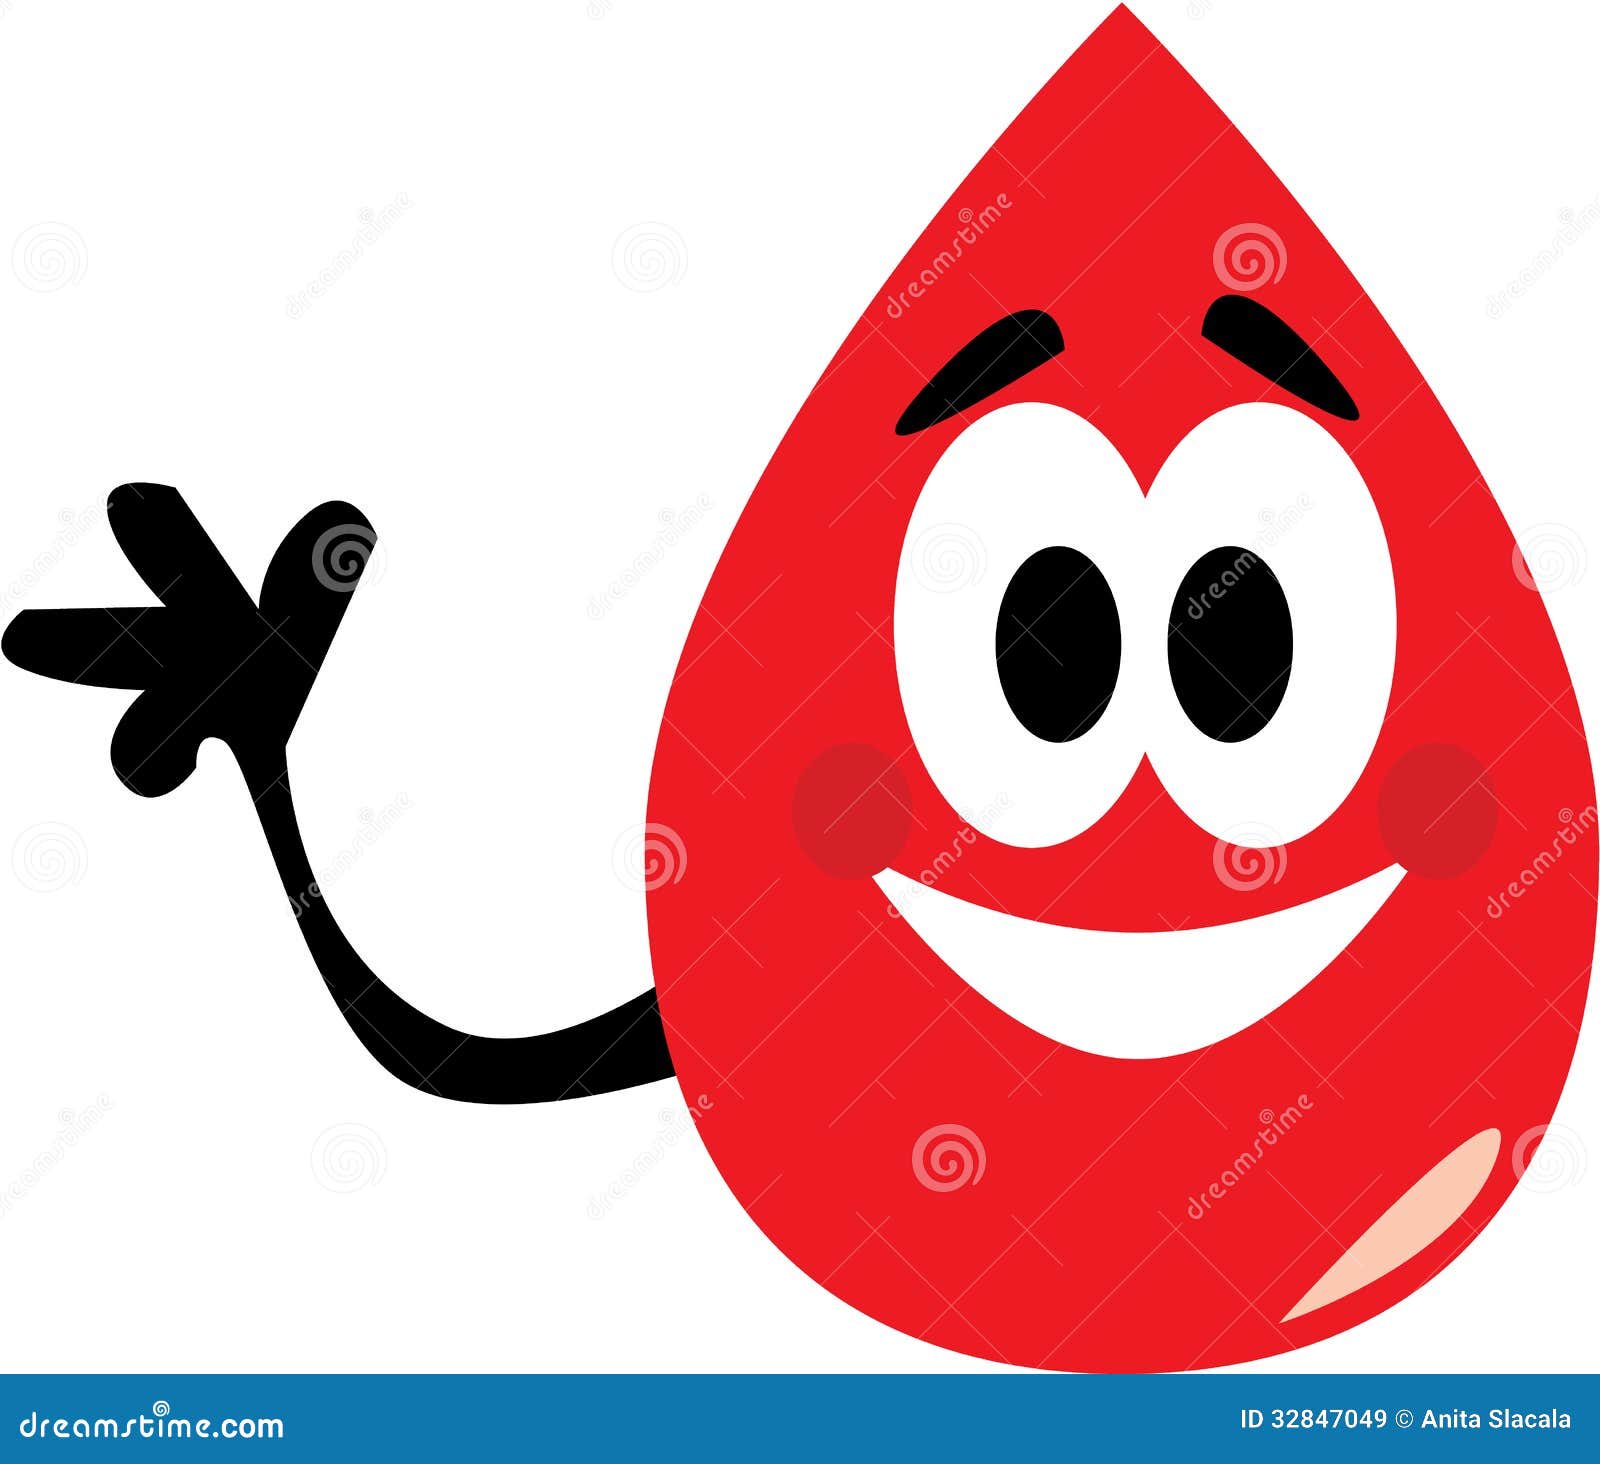 clipart blood donation - photo #22